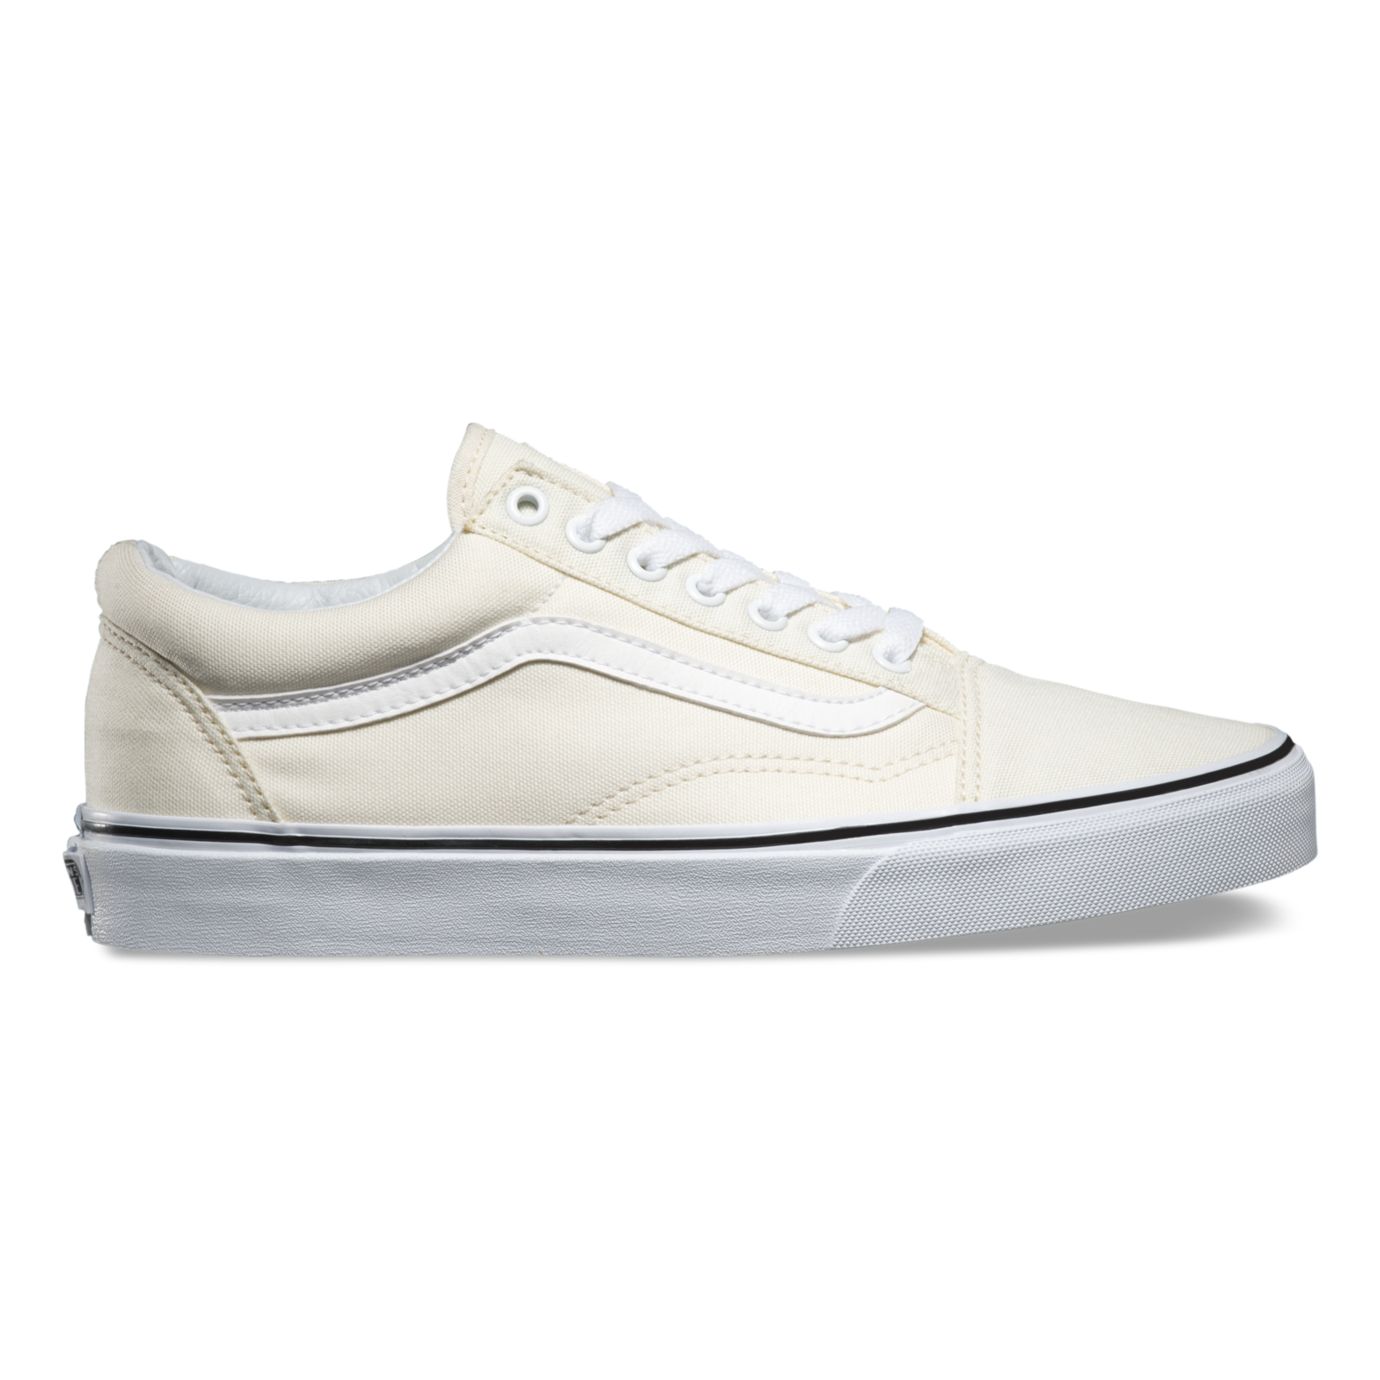 Releases New Fall Styles of Iconic Old Skool